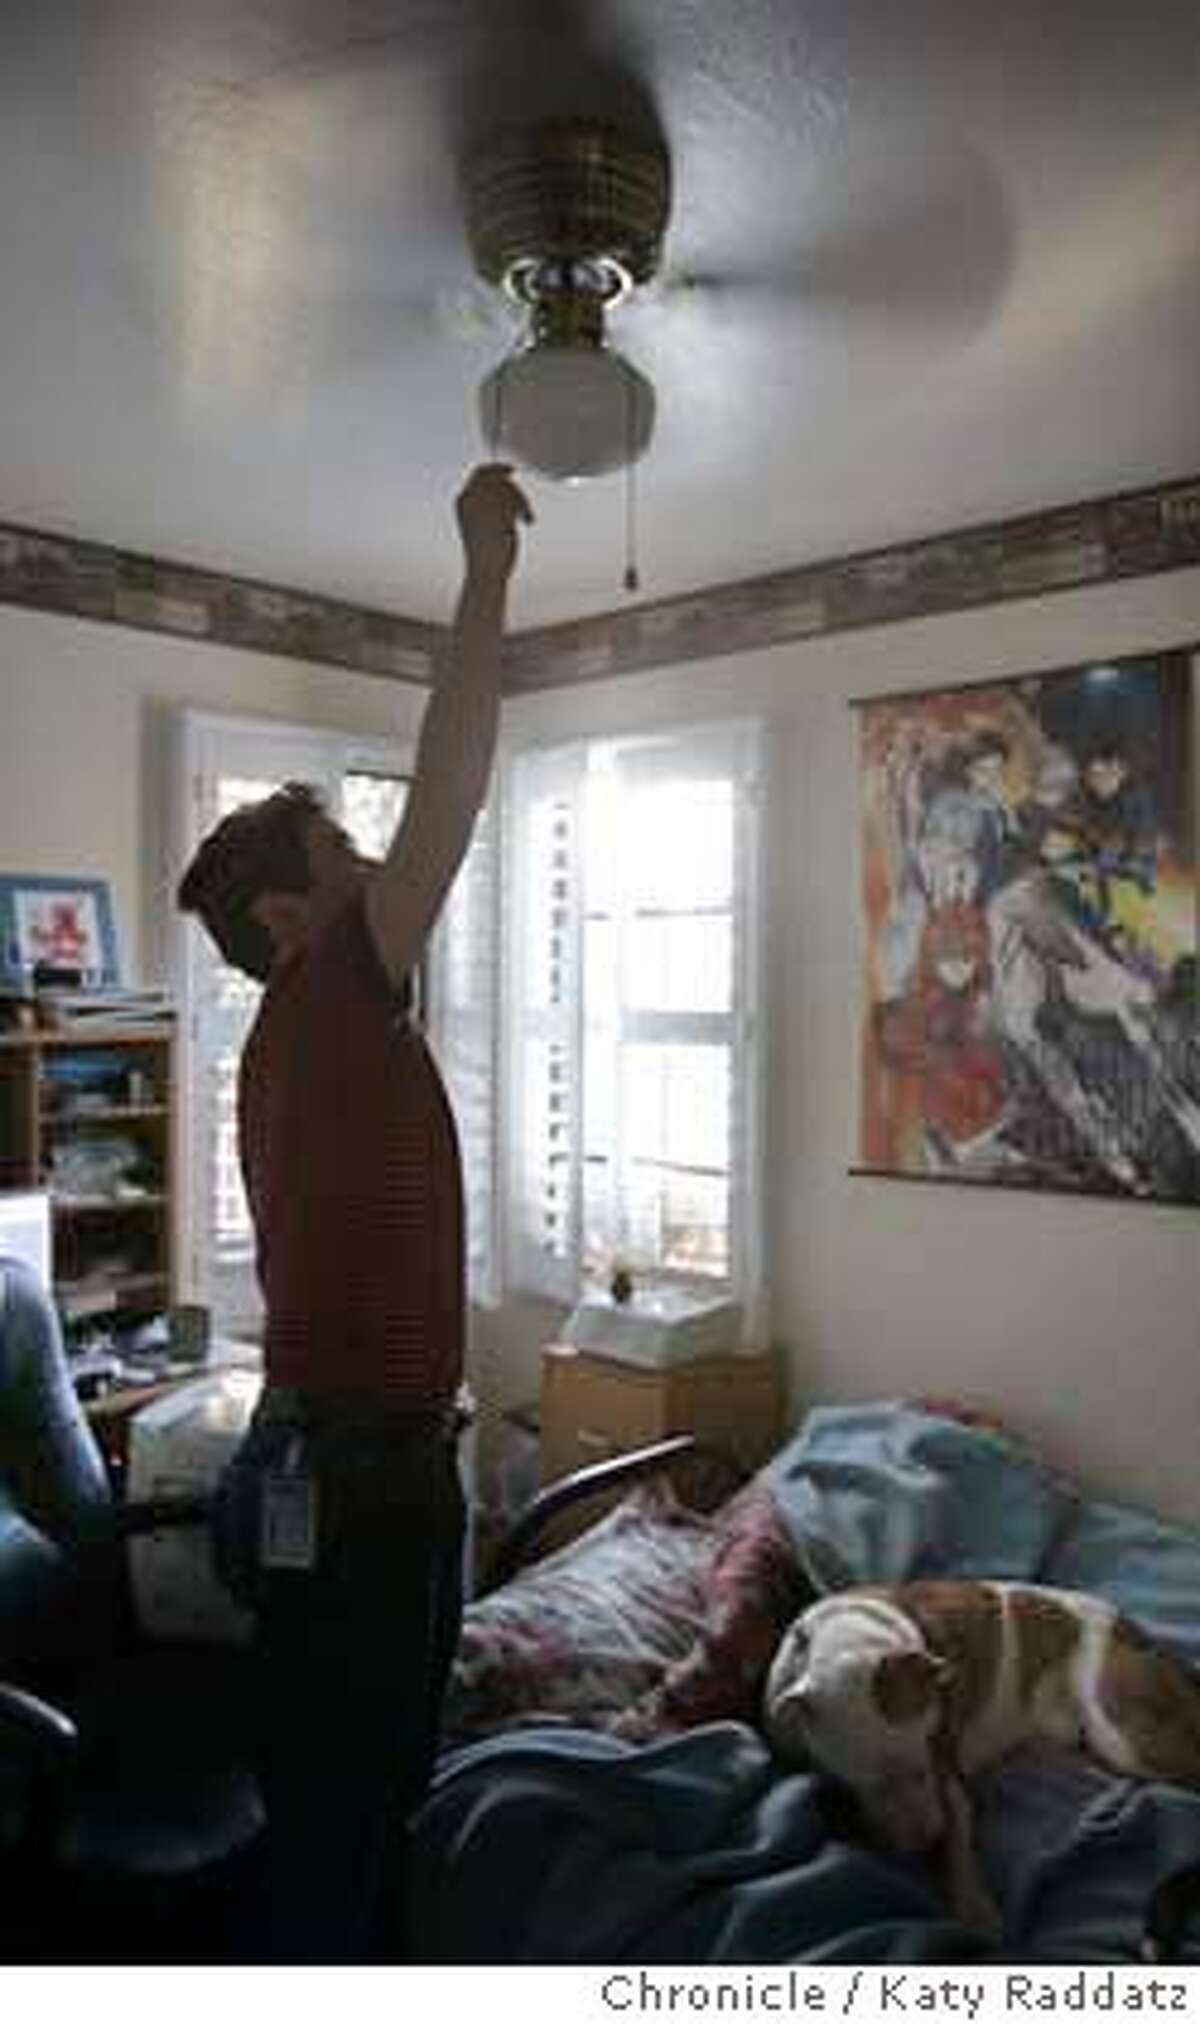 TOOHOT13058_rad.jpg SHOWN: Michael Santo invested $400 in an air conditioner for his office to keep the room and the computers cool. Here he's adding another layer of comfort: the ceiling fan. Story about excessive heat being a big issue for computer chip makers. (This is for a SECONDARY picture if needed). Katy Raddatz / The Chronicle MANDATORY CREDIT FOR PHOTOG AND SF CHRONICLE/ -MAGS OUT